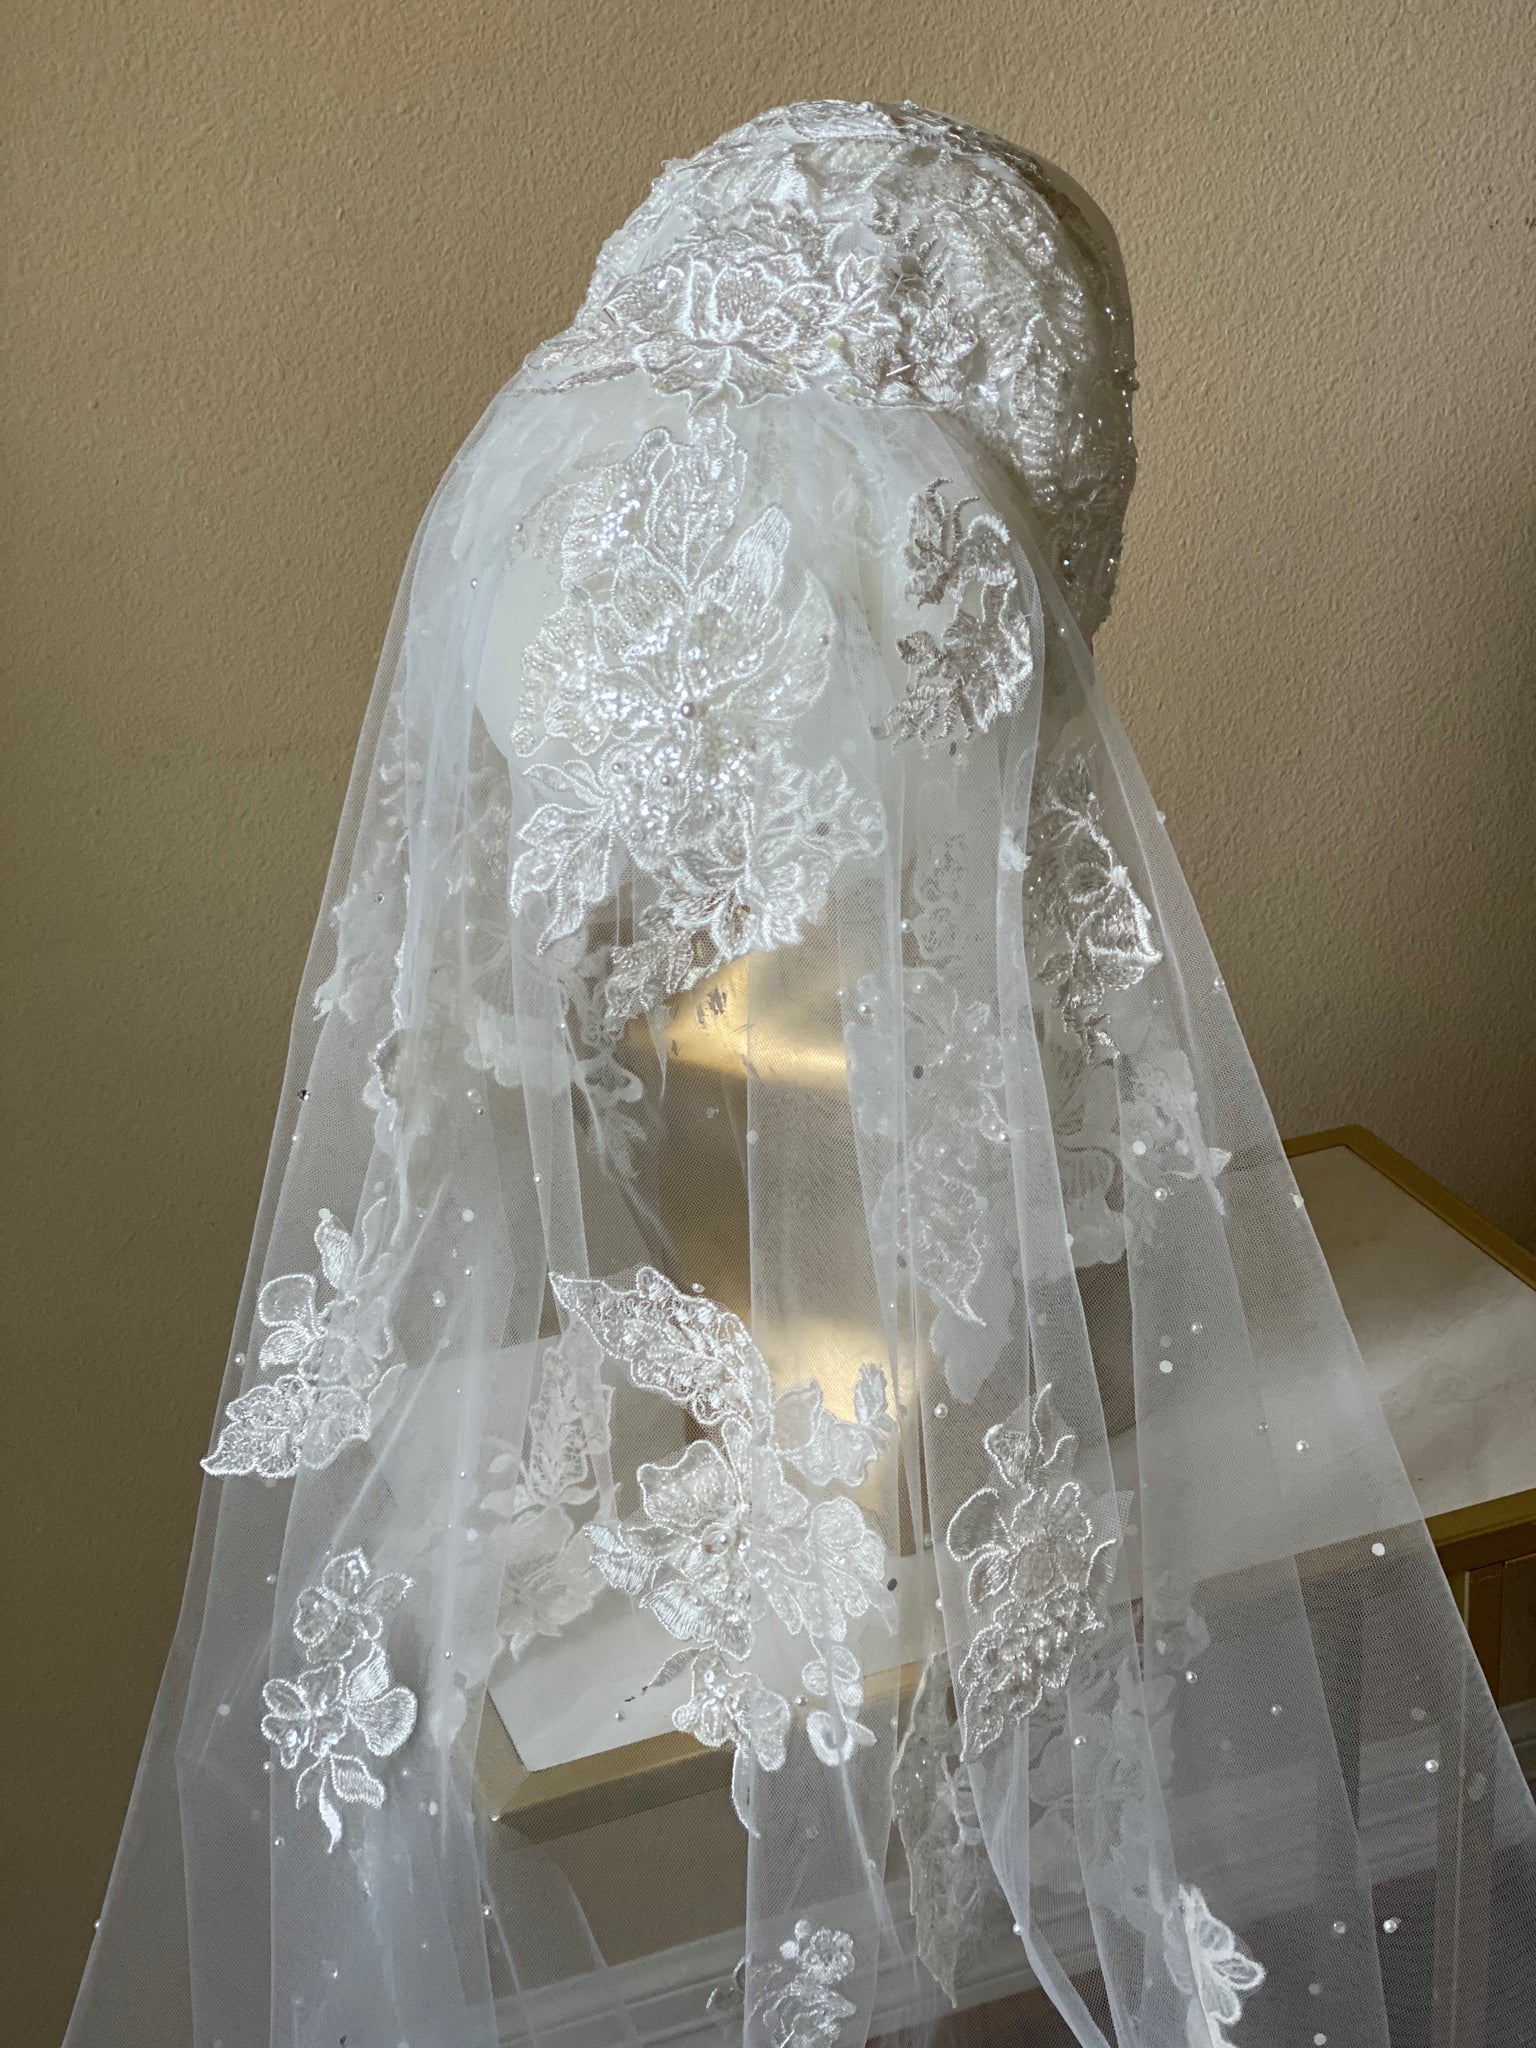 Mantilla lace trimmed veil with headband - Style #709